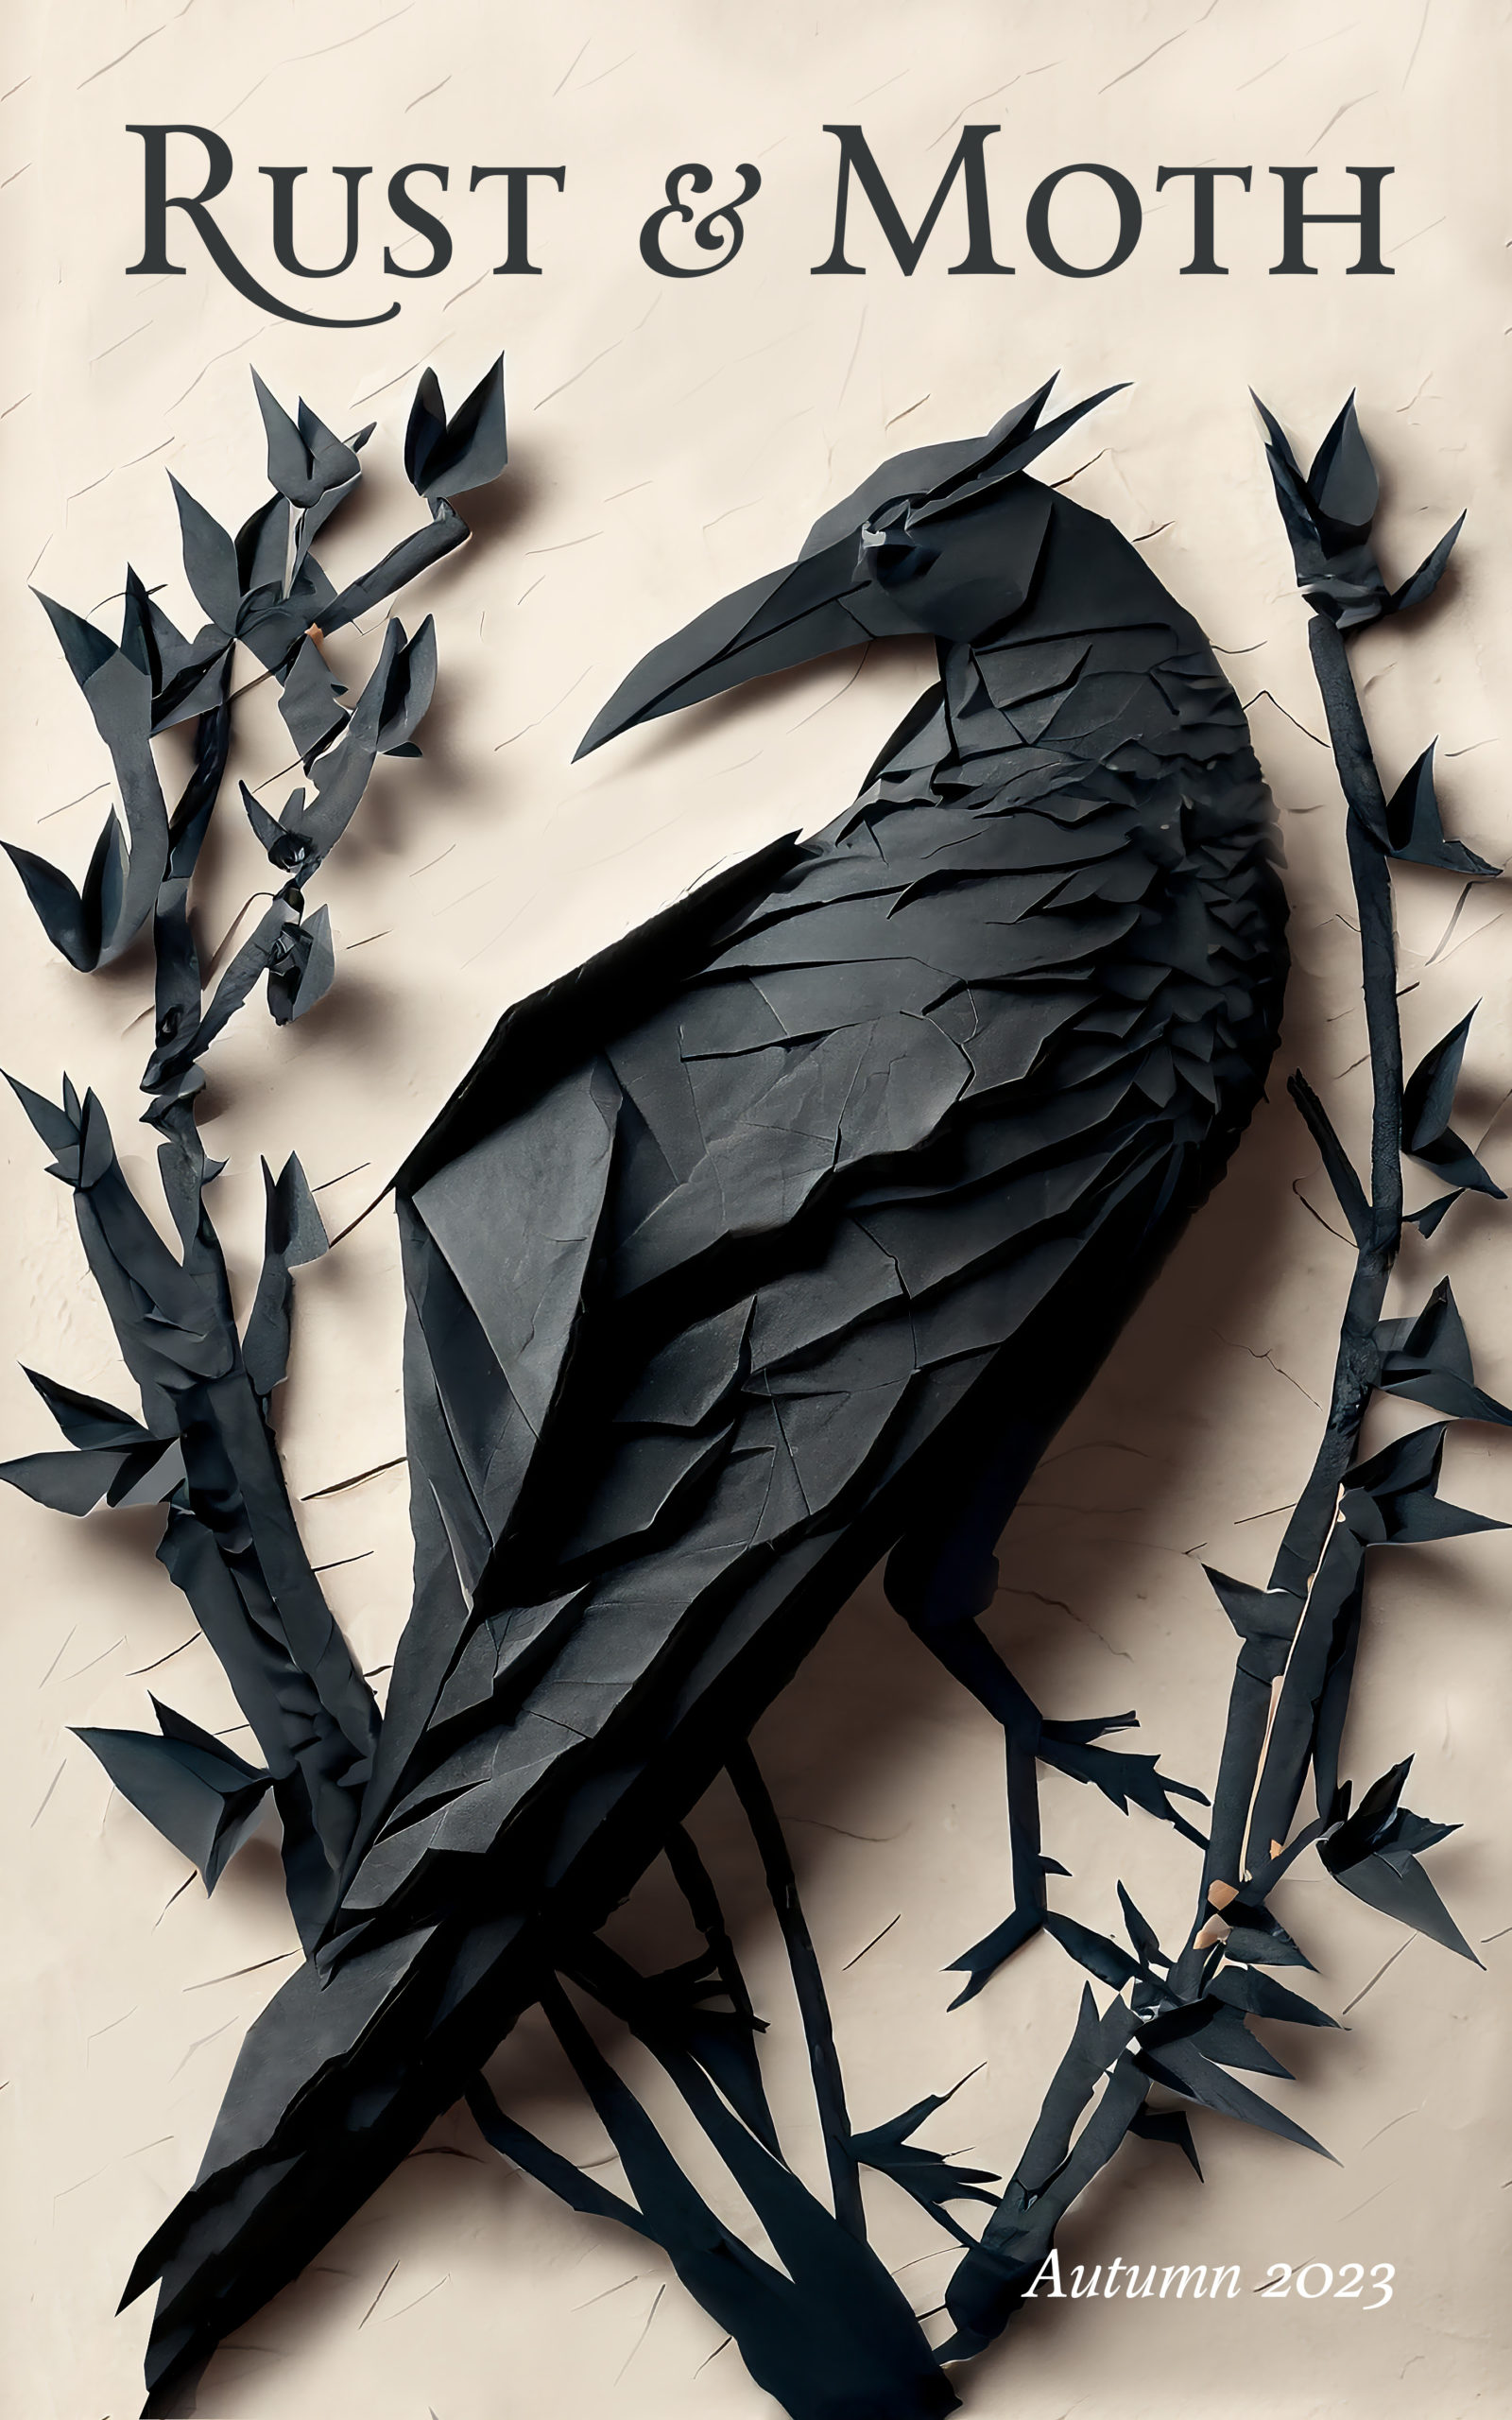 Autumn 2023 Cover: A raven made of folded black paper